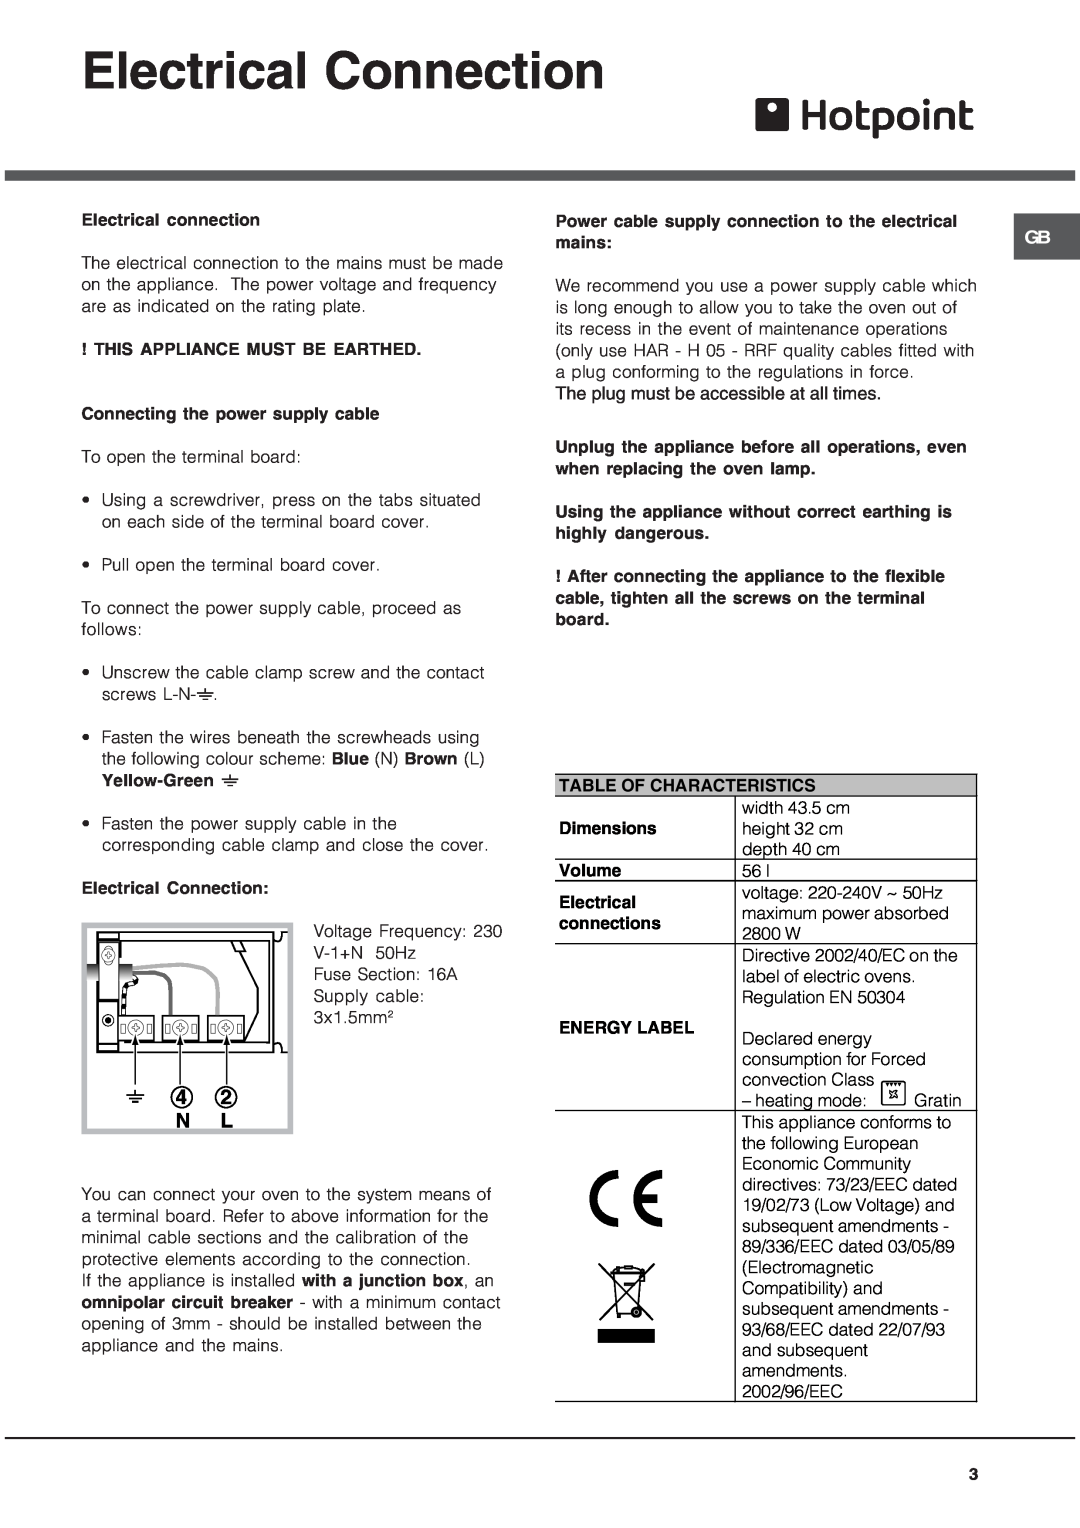 Hotpoint SE102PX, SQ102PI manual Electrical Connection, 4 2 N L, The plug must be accessible at all times 